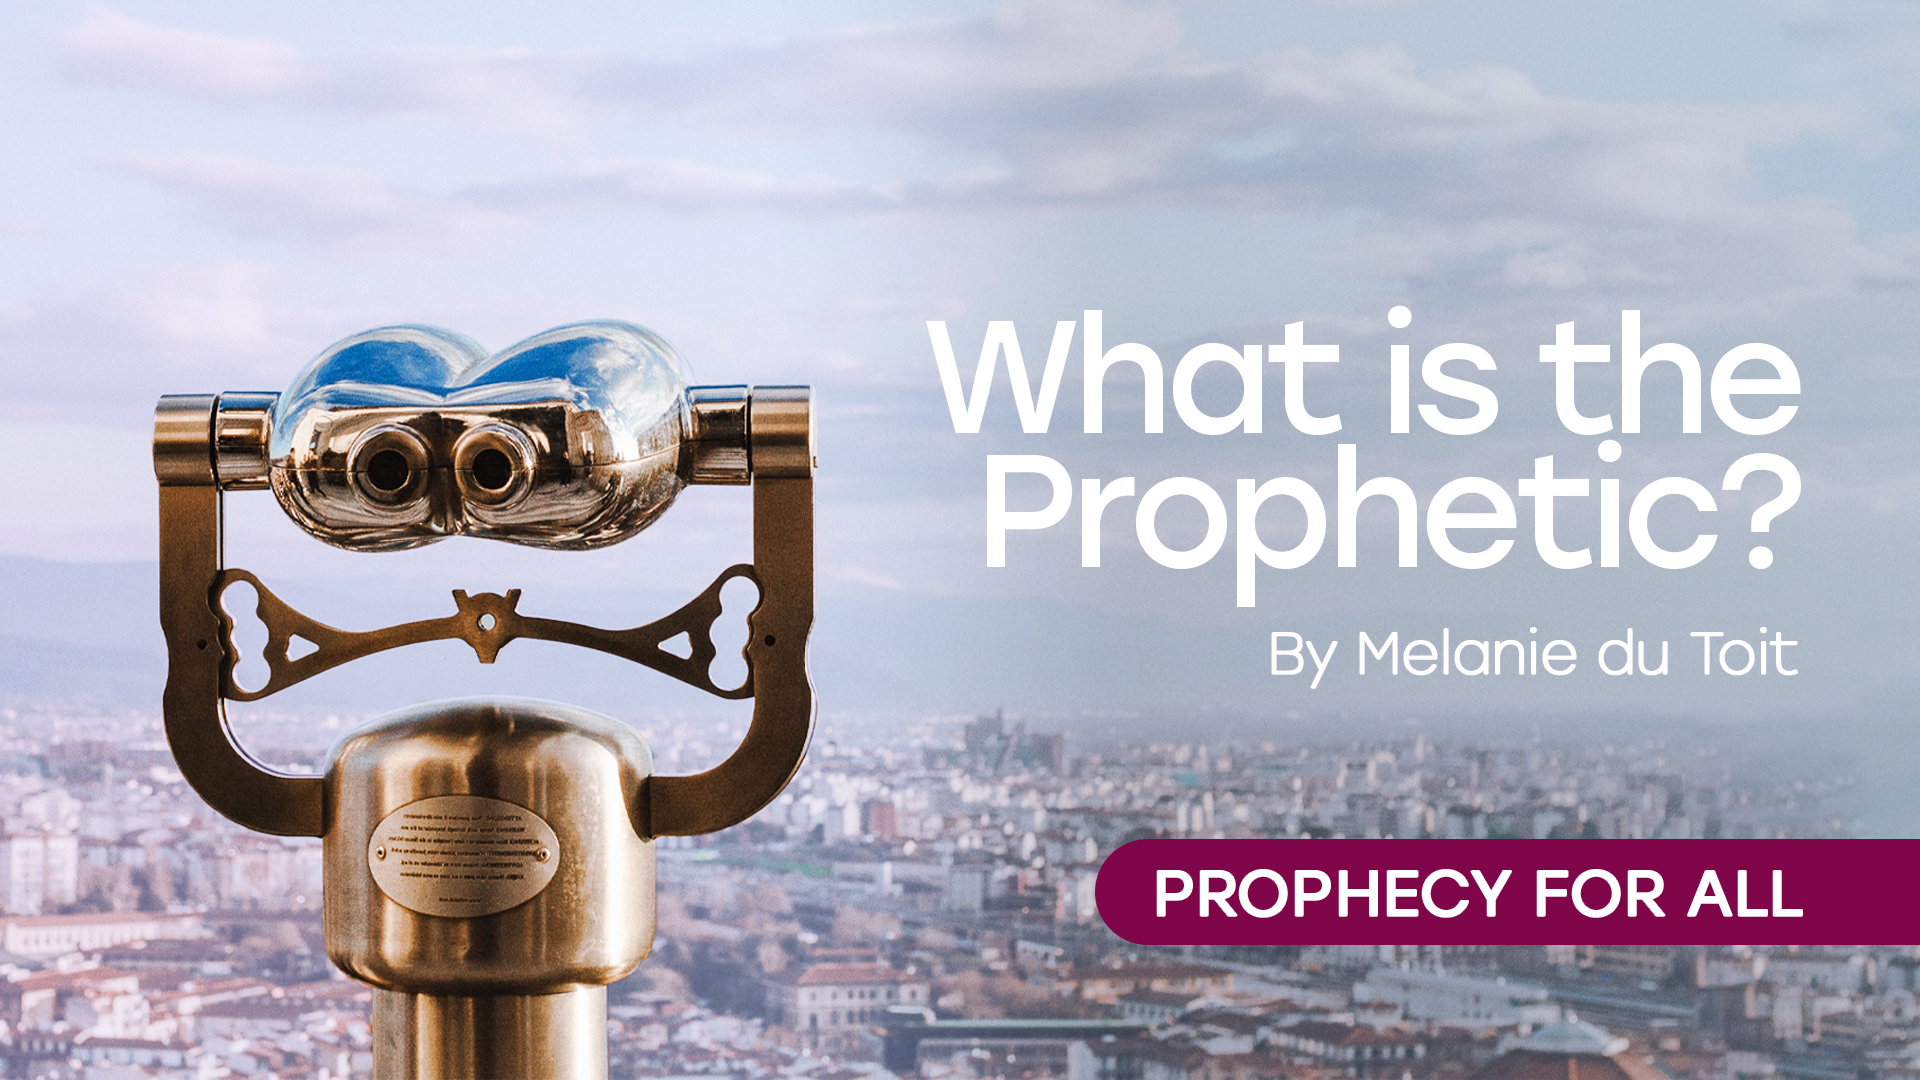 01 What is the Prophetic